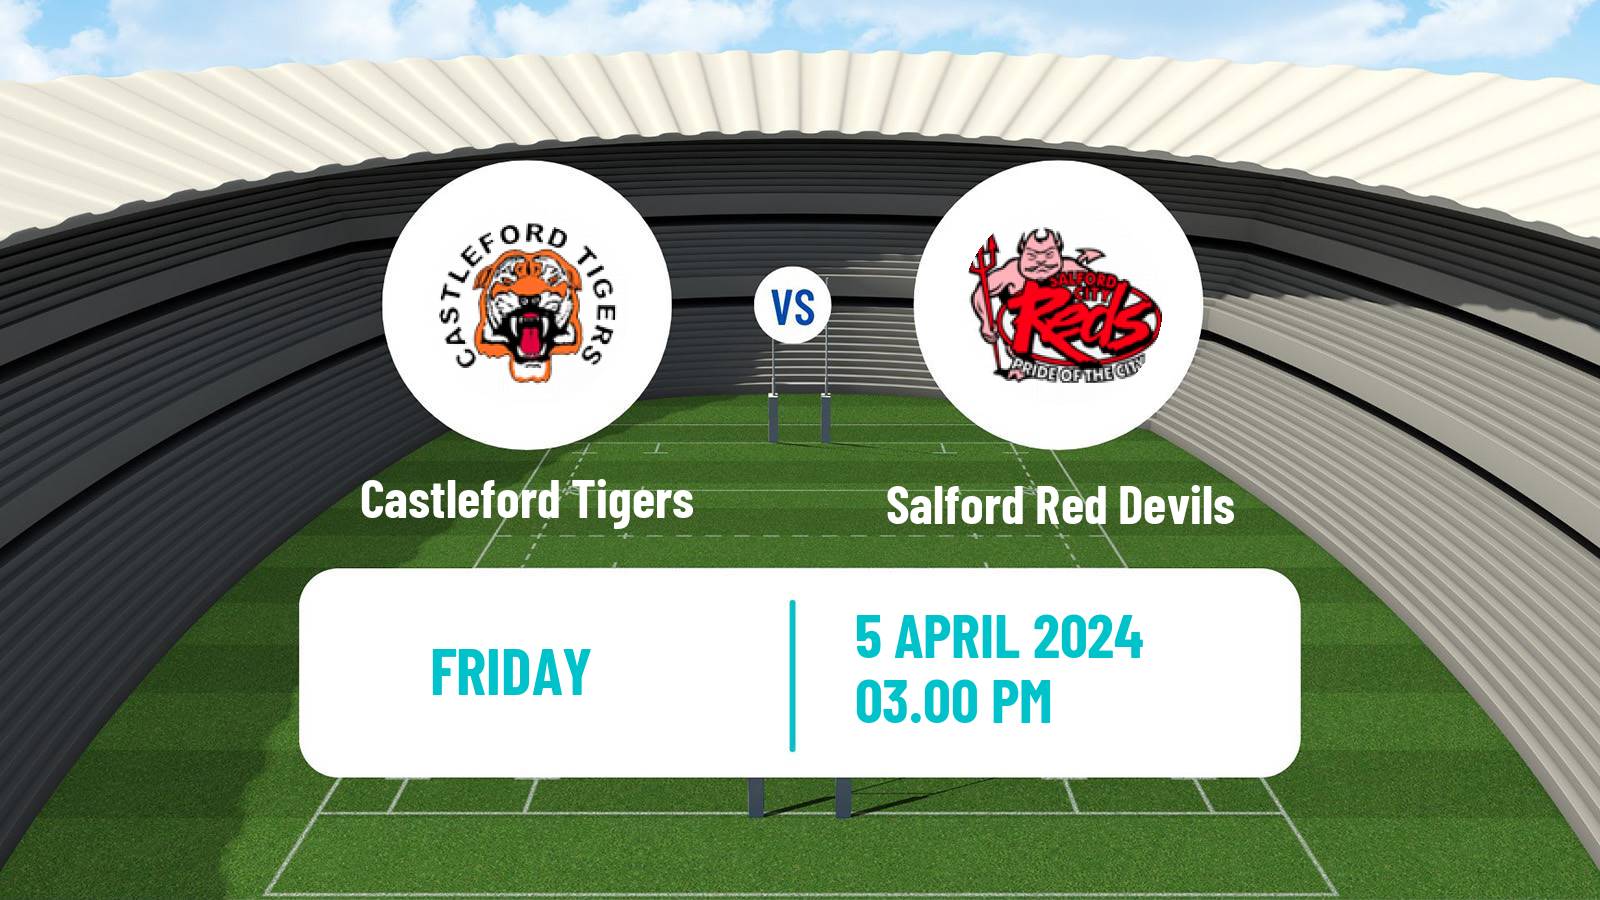 Rugby league Super League Rugby Castleford Tigers - Salford Red Devils